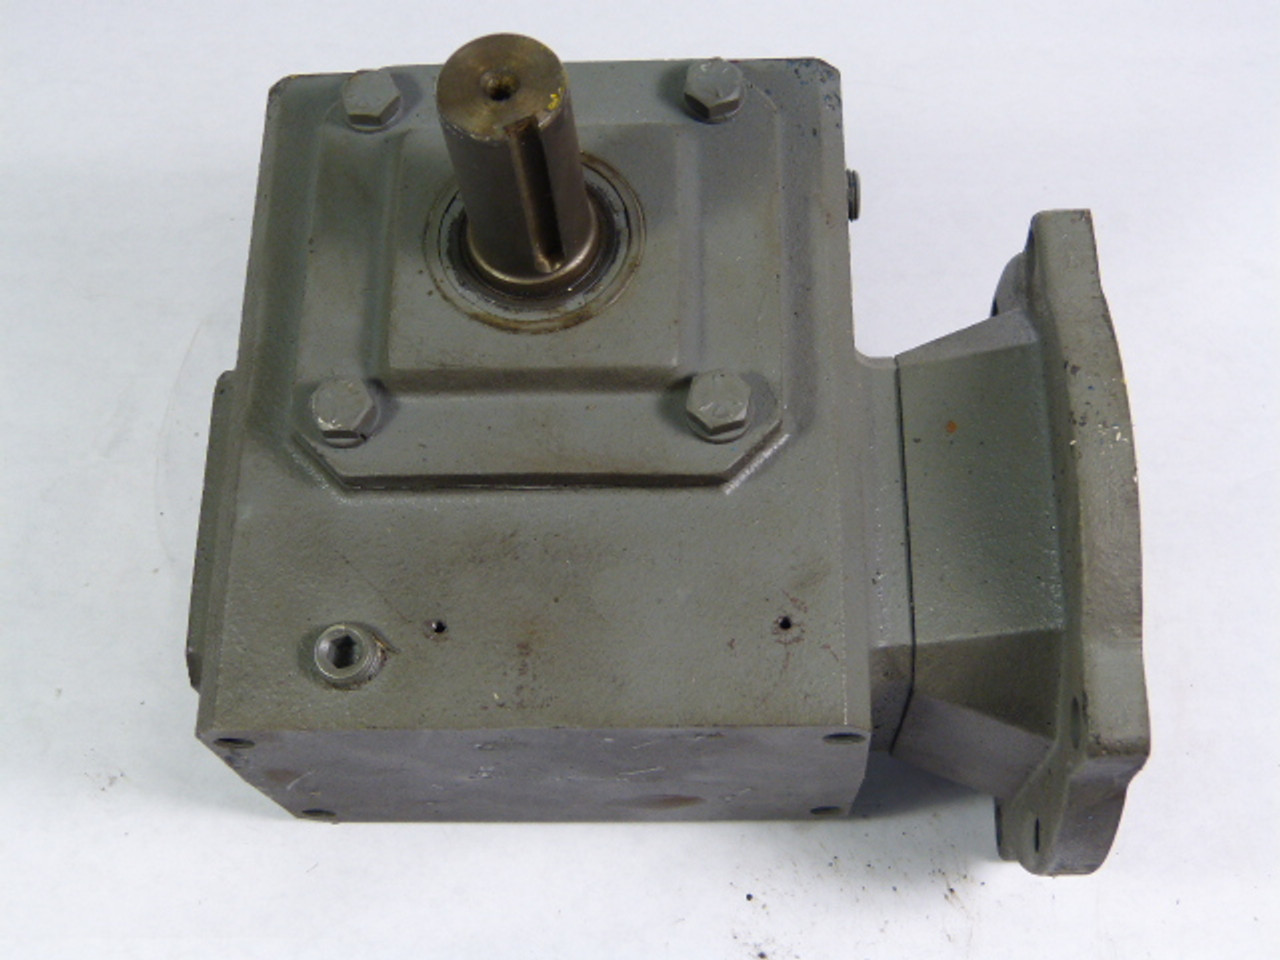 US Electrical Motors Gear Reducer 30:1 Ratio 707lb-in 0.82HP@1750RPM USED